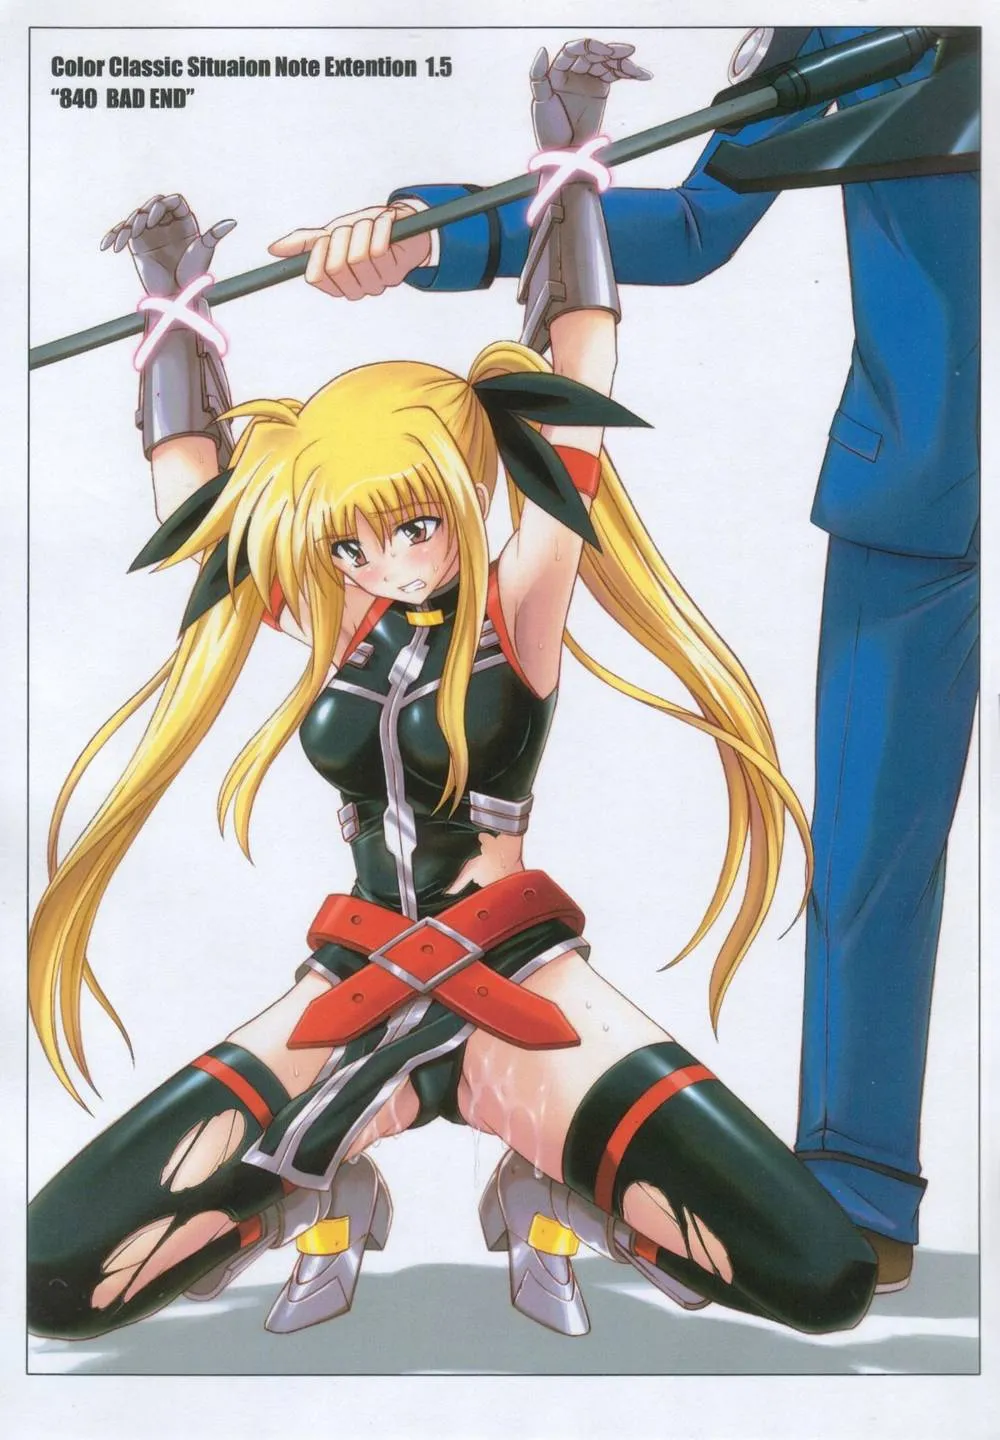 Mahou Shoujo Lyrical Nanoha,840 BAD END – Color Classic Situation Note Extention 1.5 [Japanese][第1页]